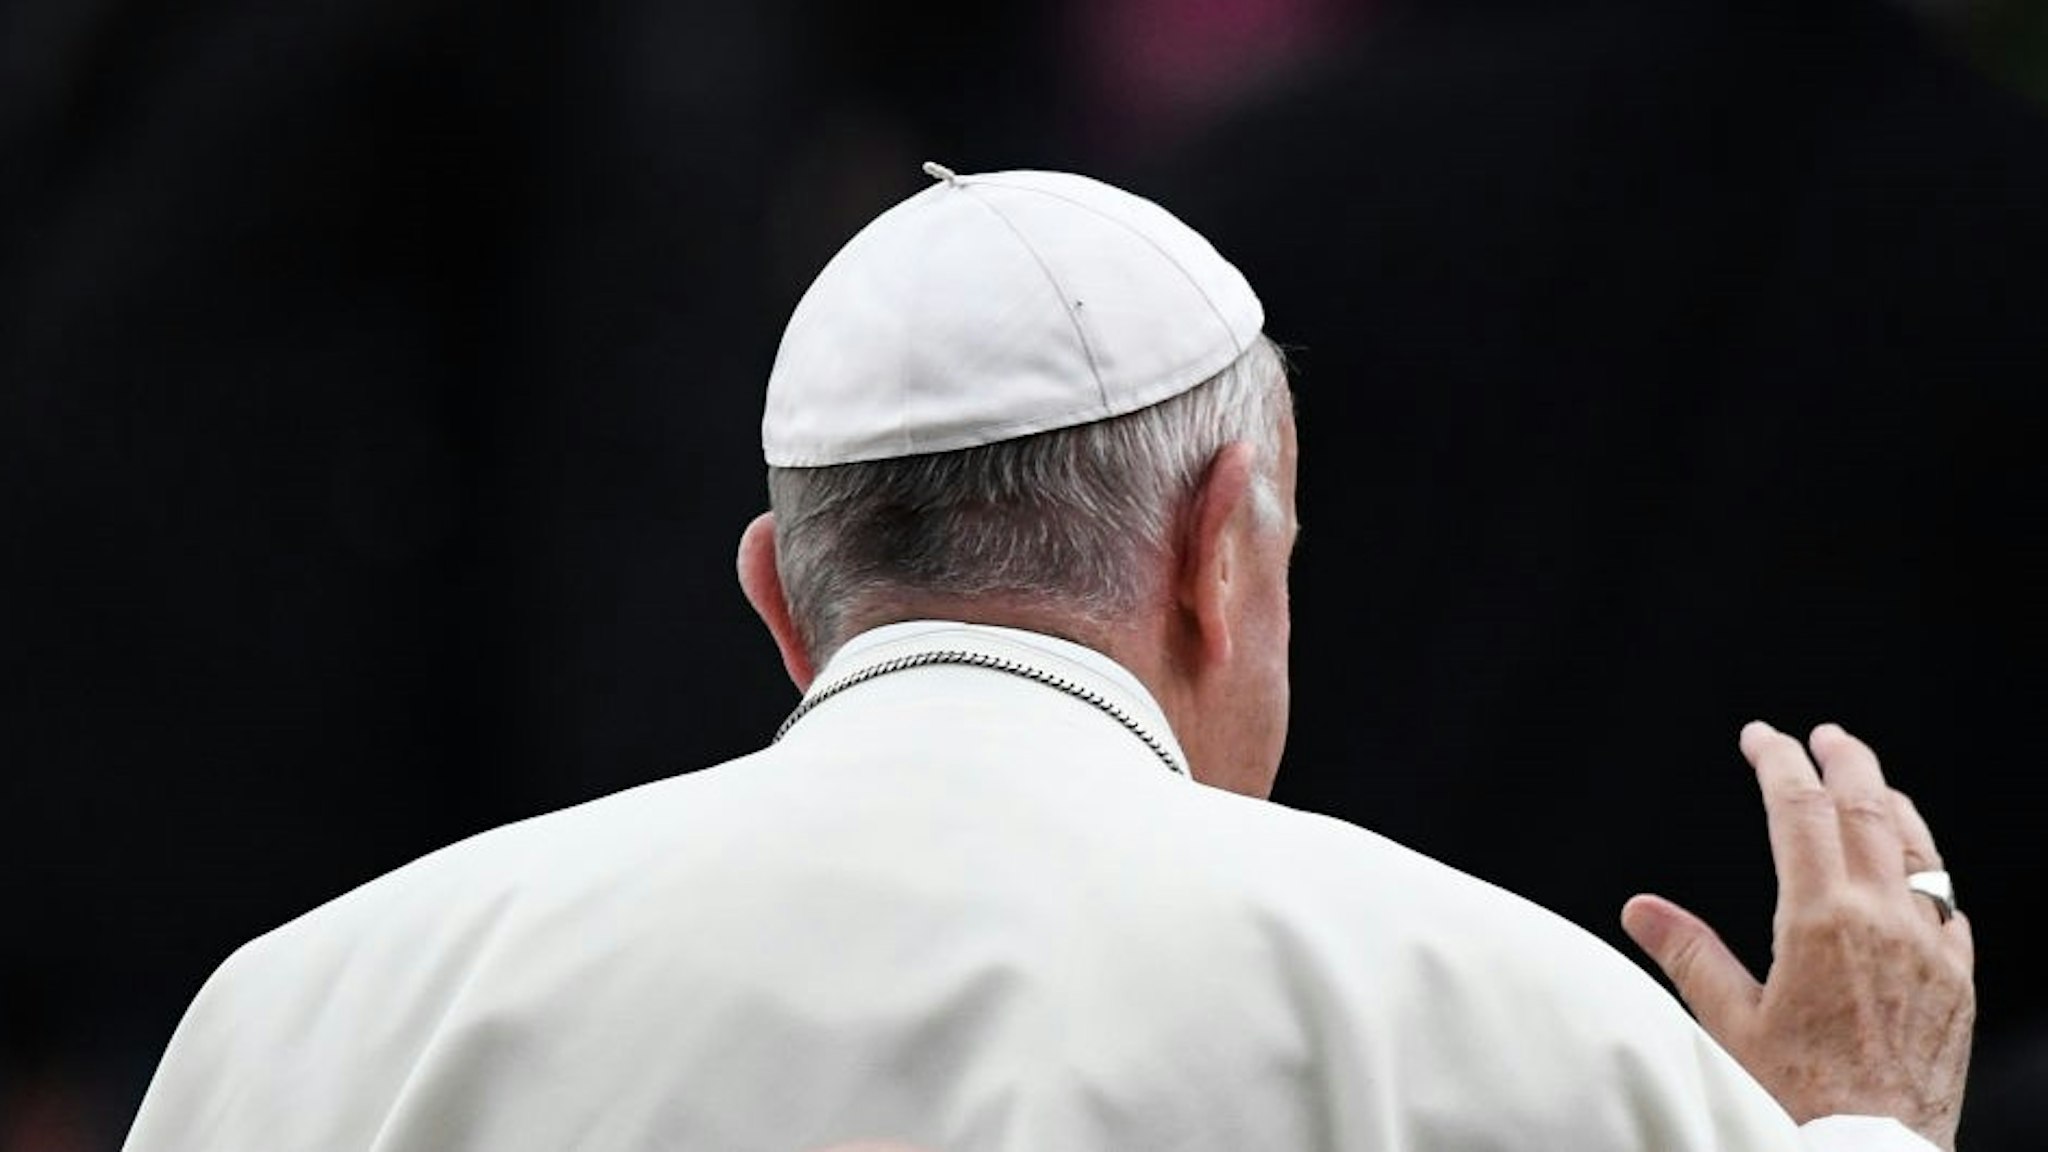 DUBLIN, IRELAND - AUGUST 25: Pope Francis attends the festival of families at Croke Park on 25 August , 2018 in Dublin, Ireland. Pope Francis is the 266th Catholic Pope and current sovereign of the Vatican. His visit, the first by a Pope since John Paul II's in 1979, is expected to attract hundreds of thousands of Catholics to a series of events in Dublin and Knock. During his visit he will have private meetings with victims of sexual abuse by Catholic clergy. (Photo by